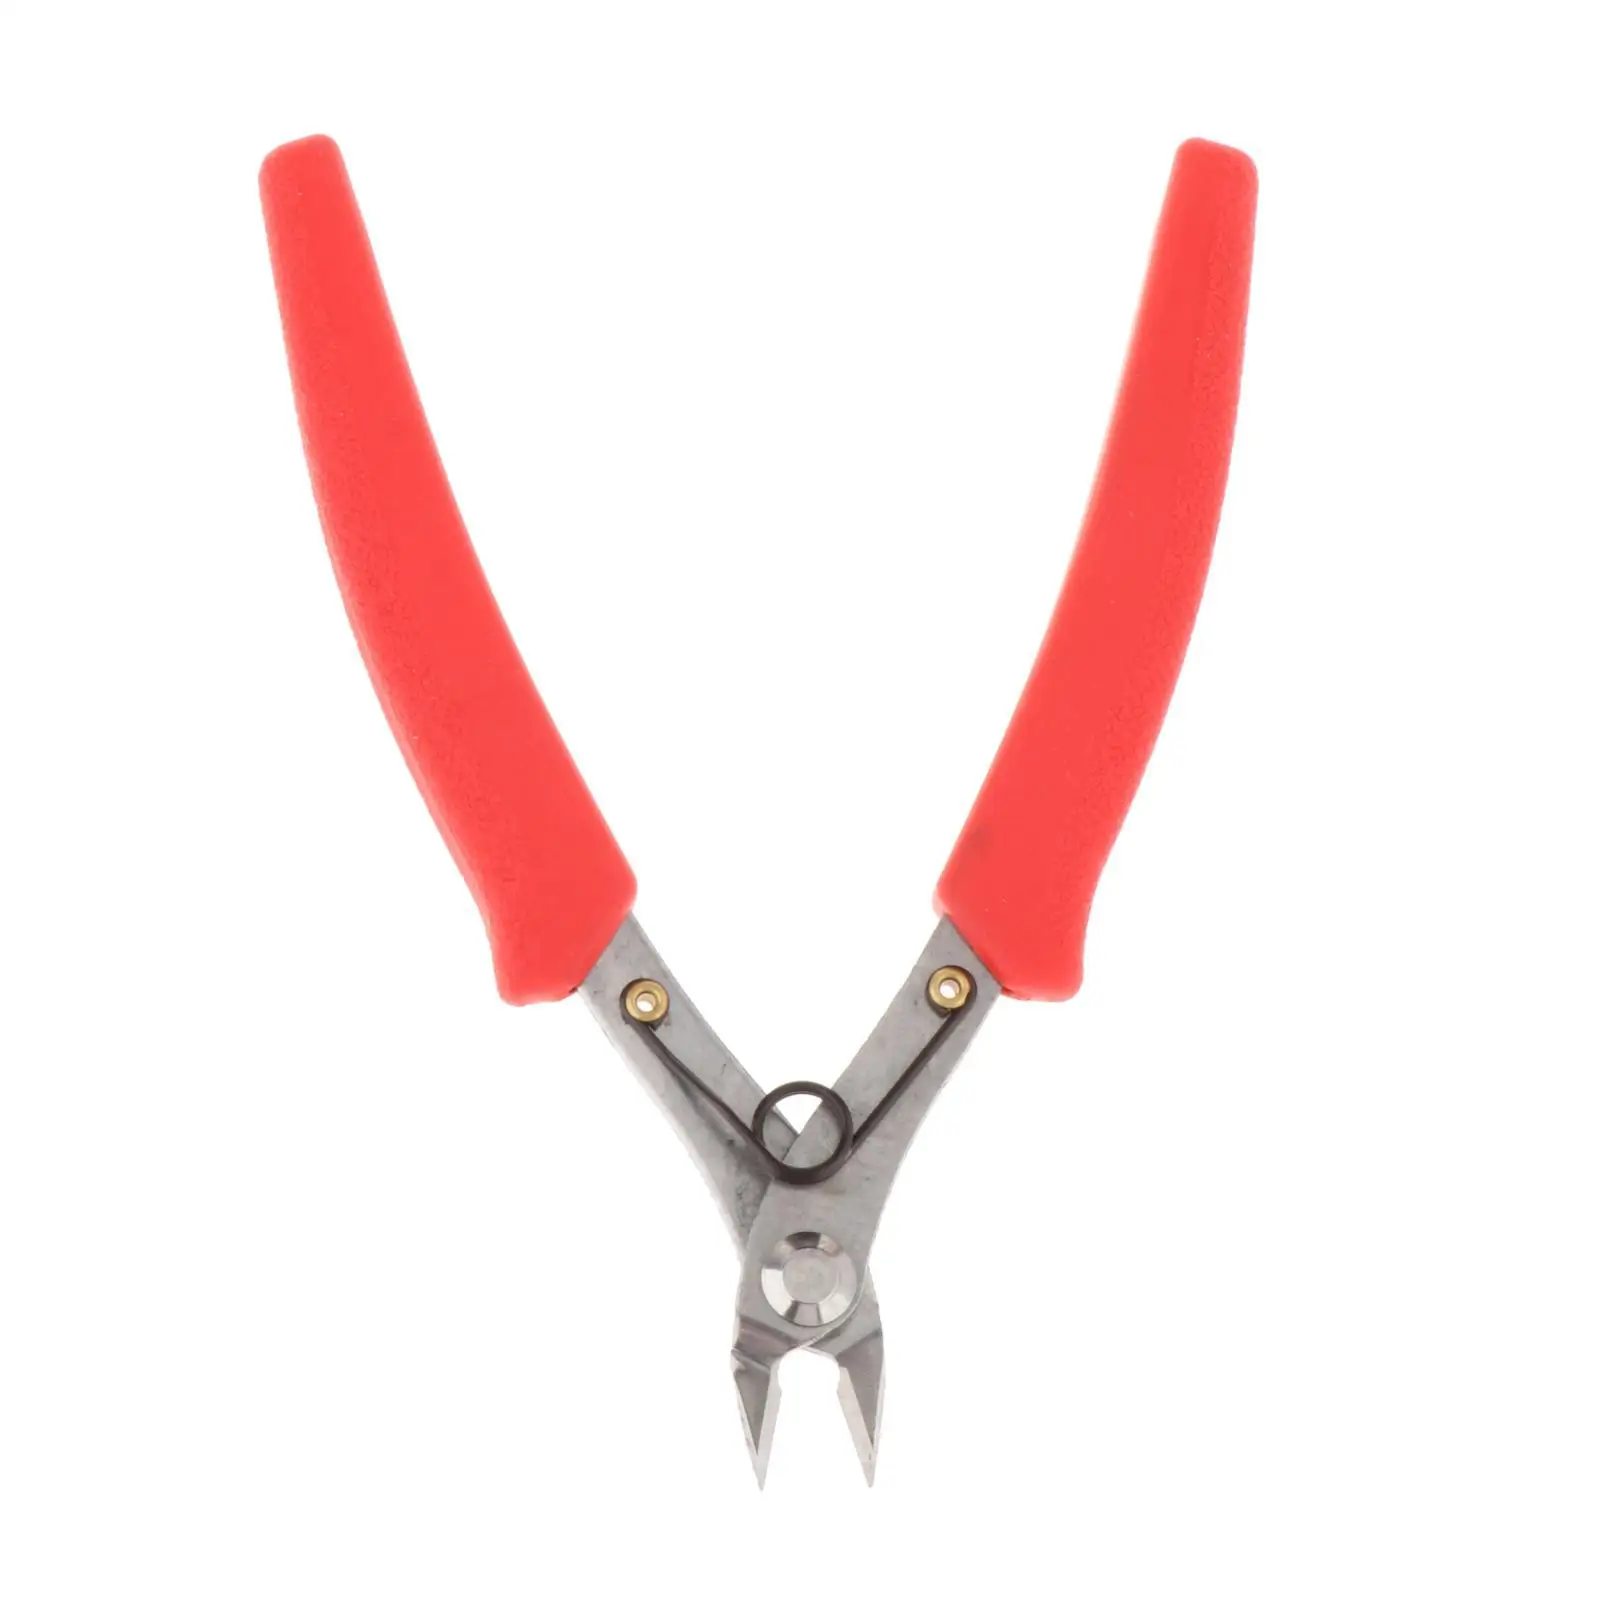 Diagonal Cutting Pliers Nippers Equipment Badminton Tennis Racket Wire Cutter for Crafts Electronic Industry Repair Repairing